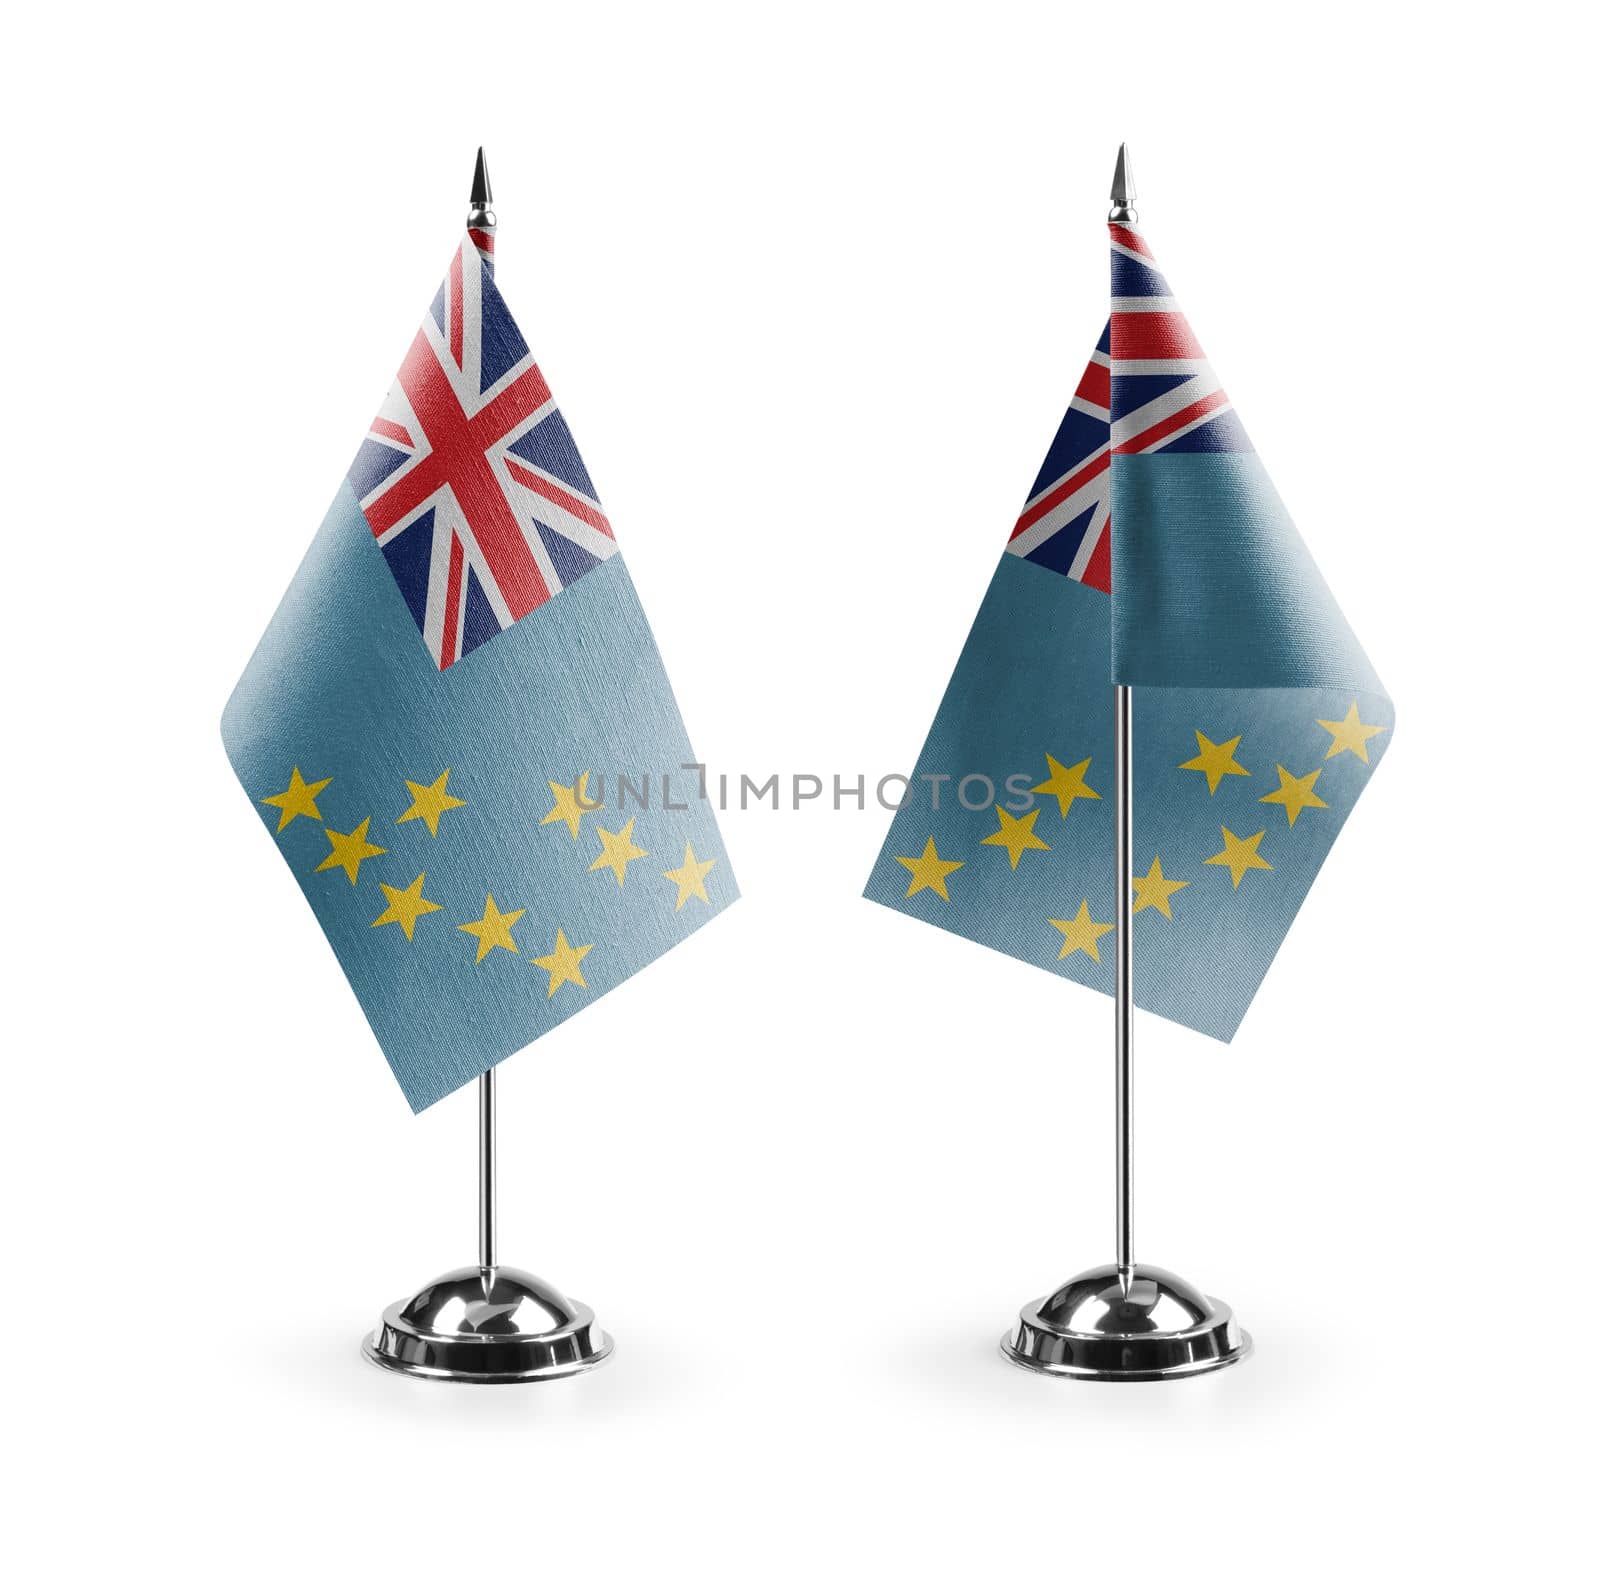 Small national flags of the Tuvalu on a white background.